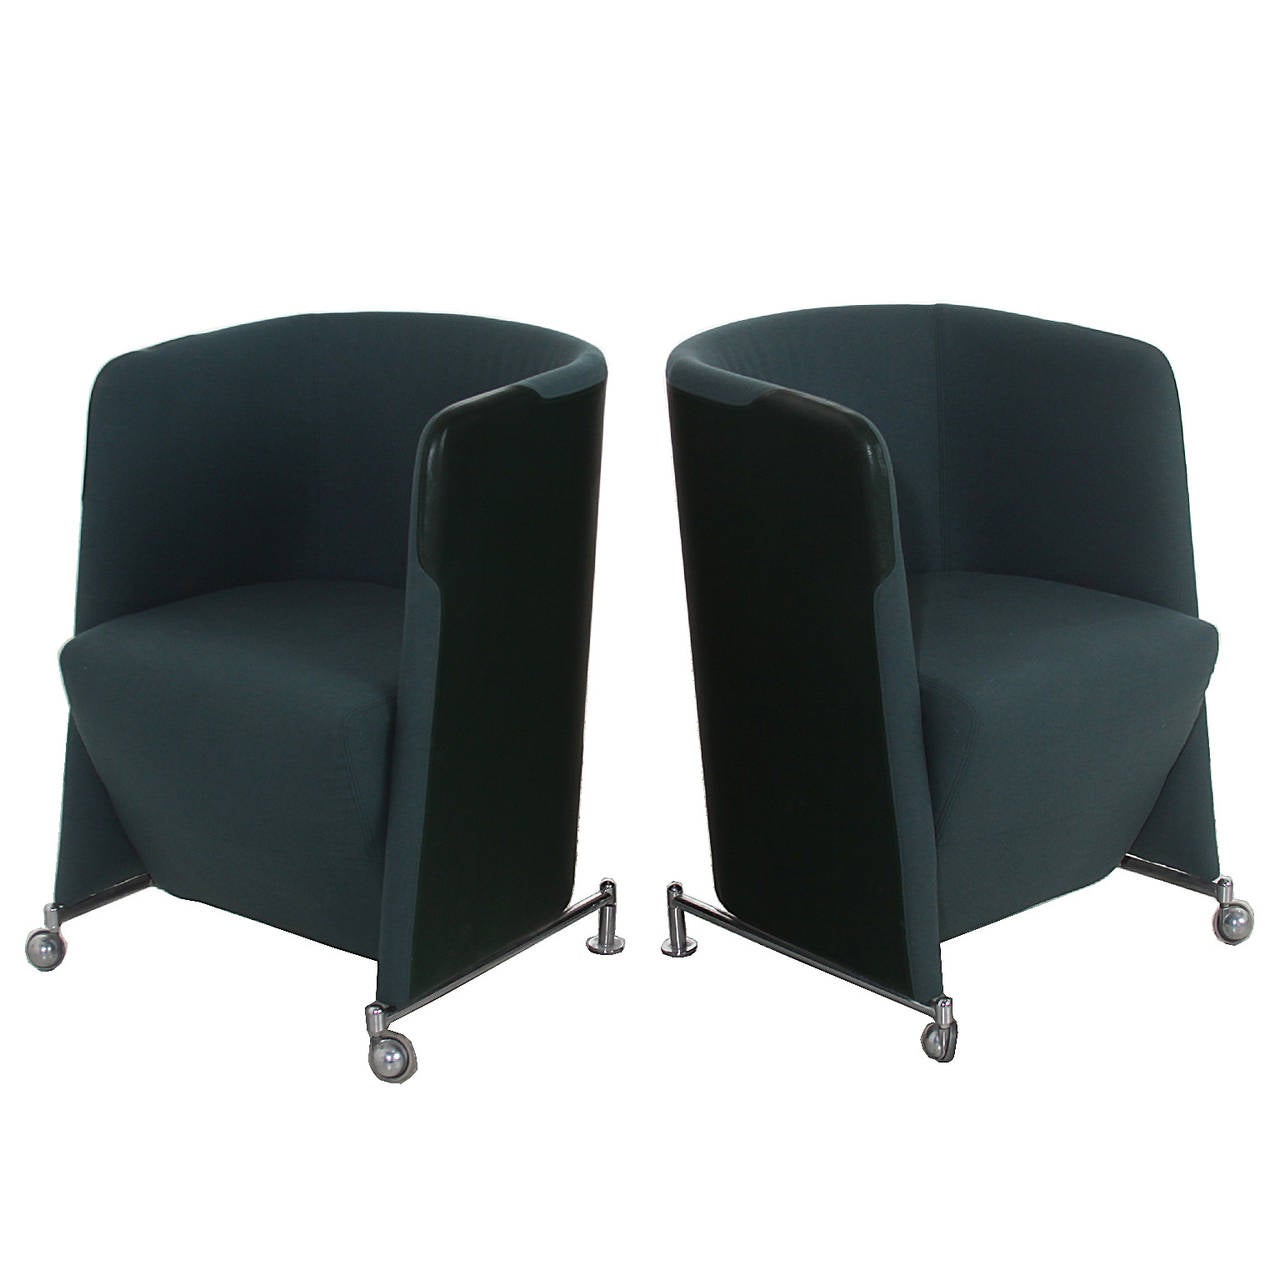 A pair of interesting Swedish side chairs with chrome bases and combined green wool fabric and leather upholstery. Comfortable but slim in profile and upright.

Many pieces are stored in our warehouse, so please click on CONTACT DEALER under our